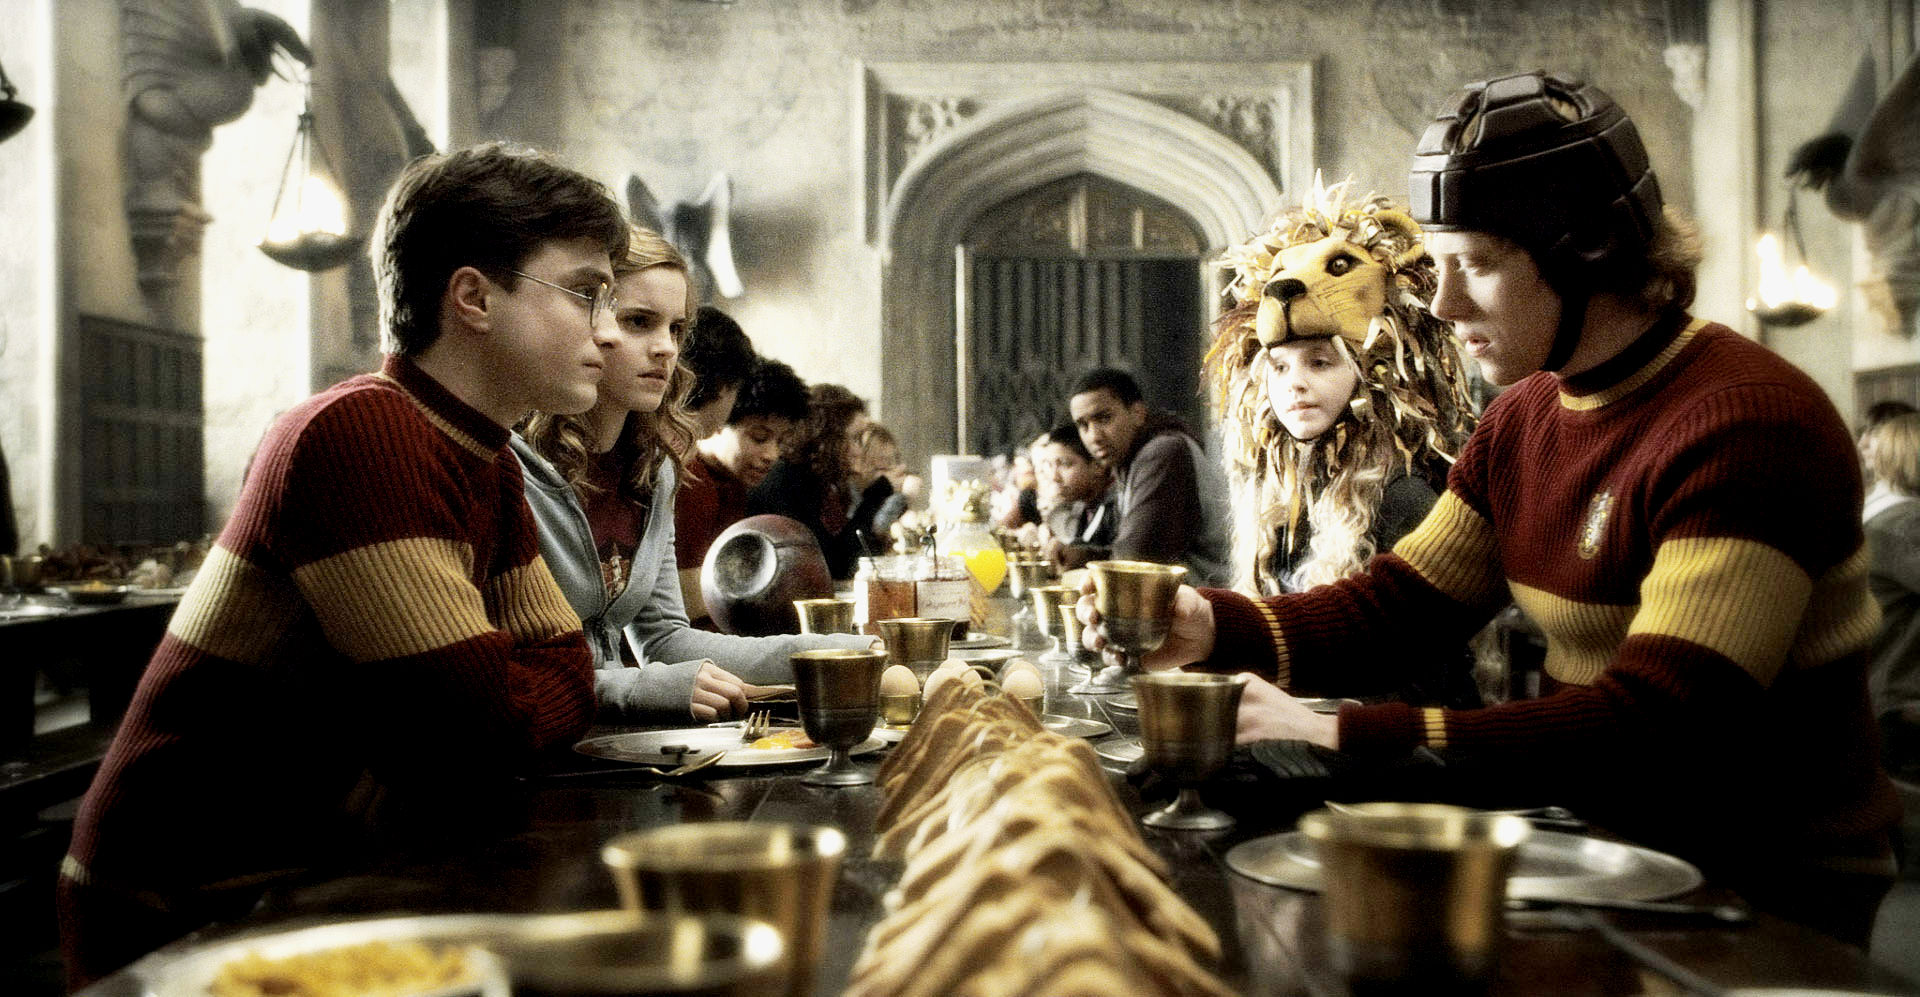 Daniel Radcliffe, Emma Watson, Evanna Lynch and Rupert Grint in Warner Bros Pictures' Harry Potter and the Half-Blood Prince (2009)